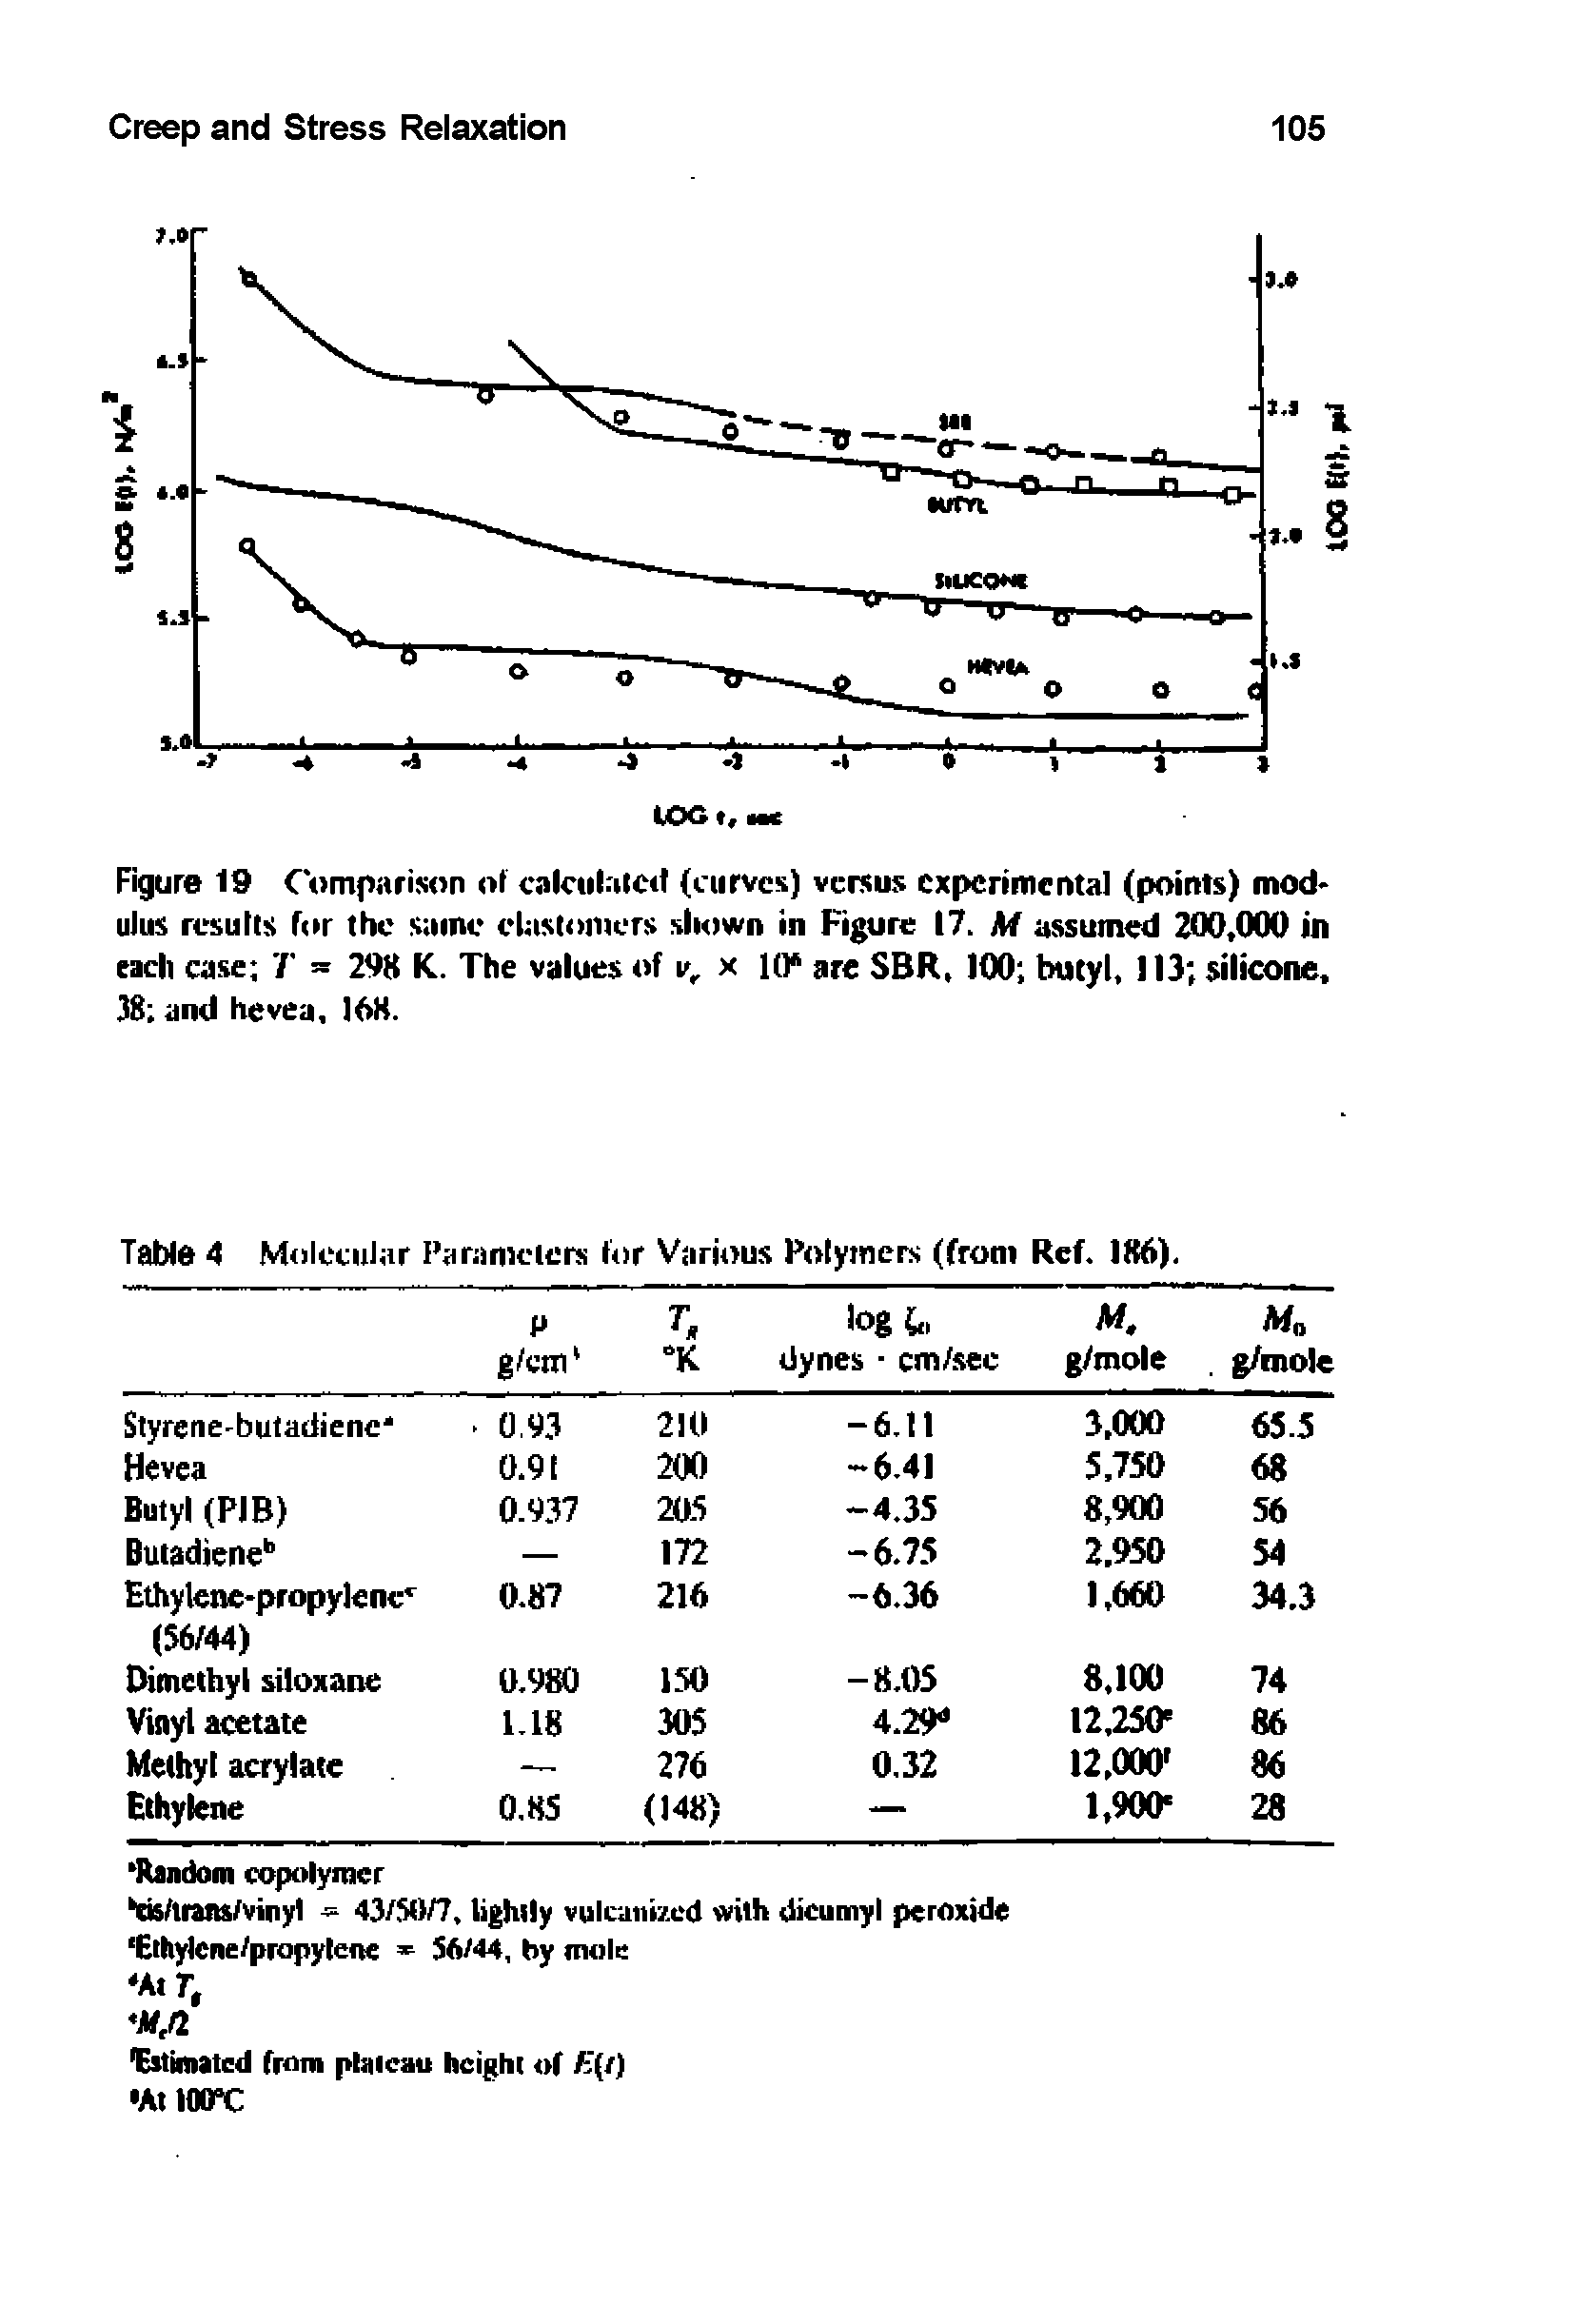 Figure 19 Comparison of calculated (curves) versus experimental (points) modulus results (or the same elastomers shown in Figure 17. M assumed 200,000 in each case / = 298 K. The values of v, x 10 are SBR, 100 butyl, 113 silicone, 38 and hevea, 168.